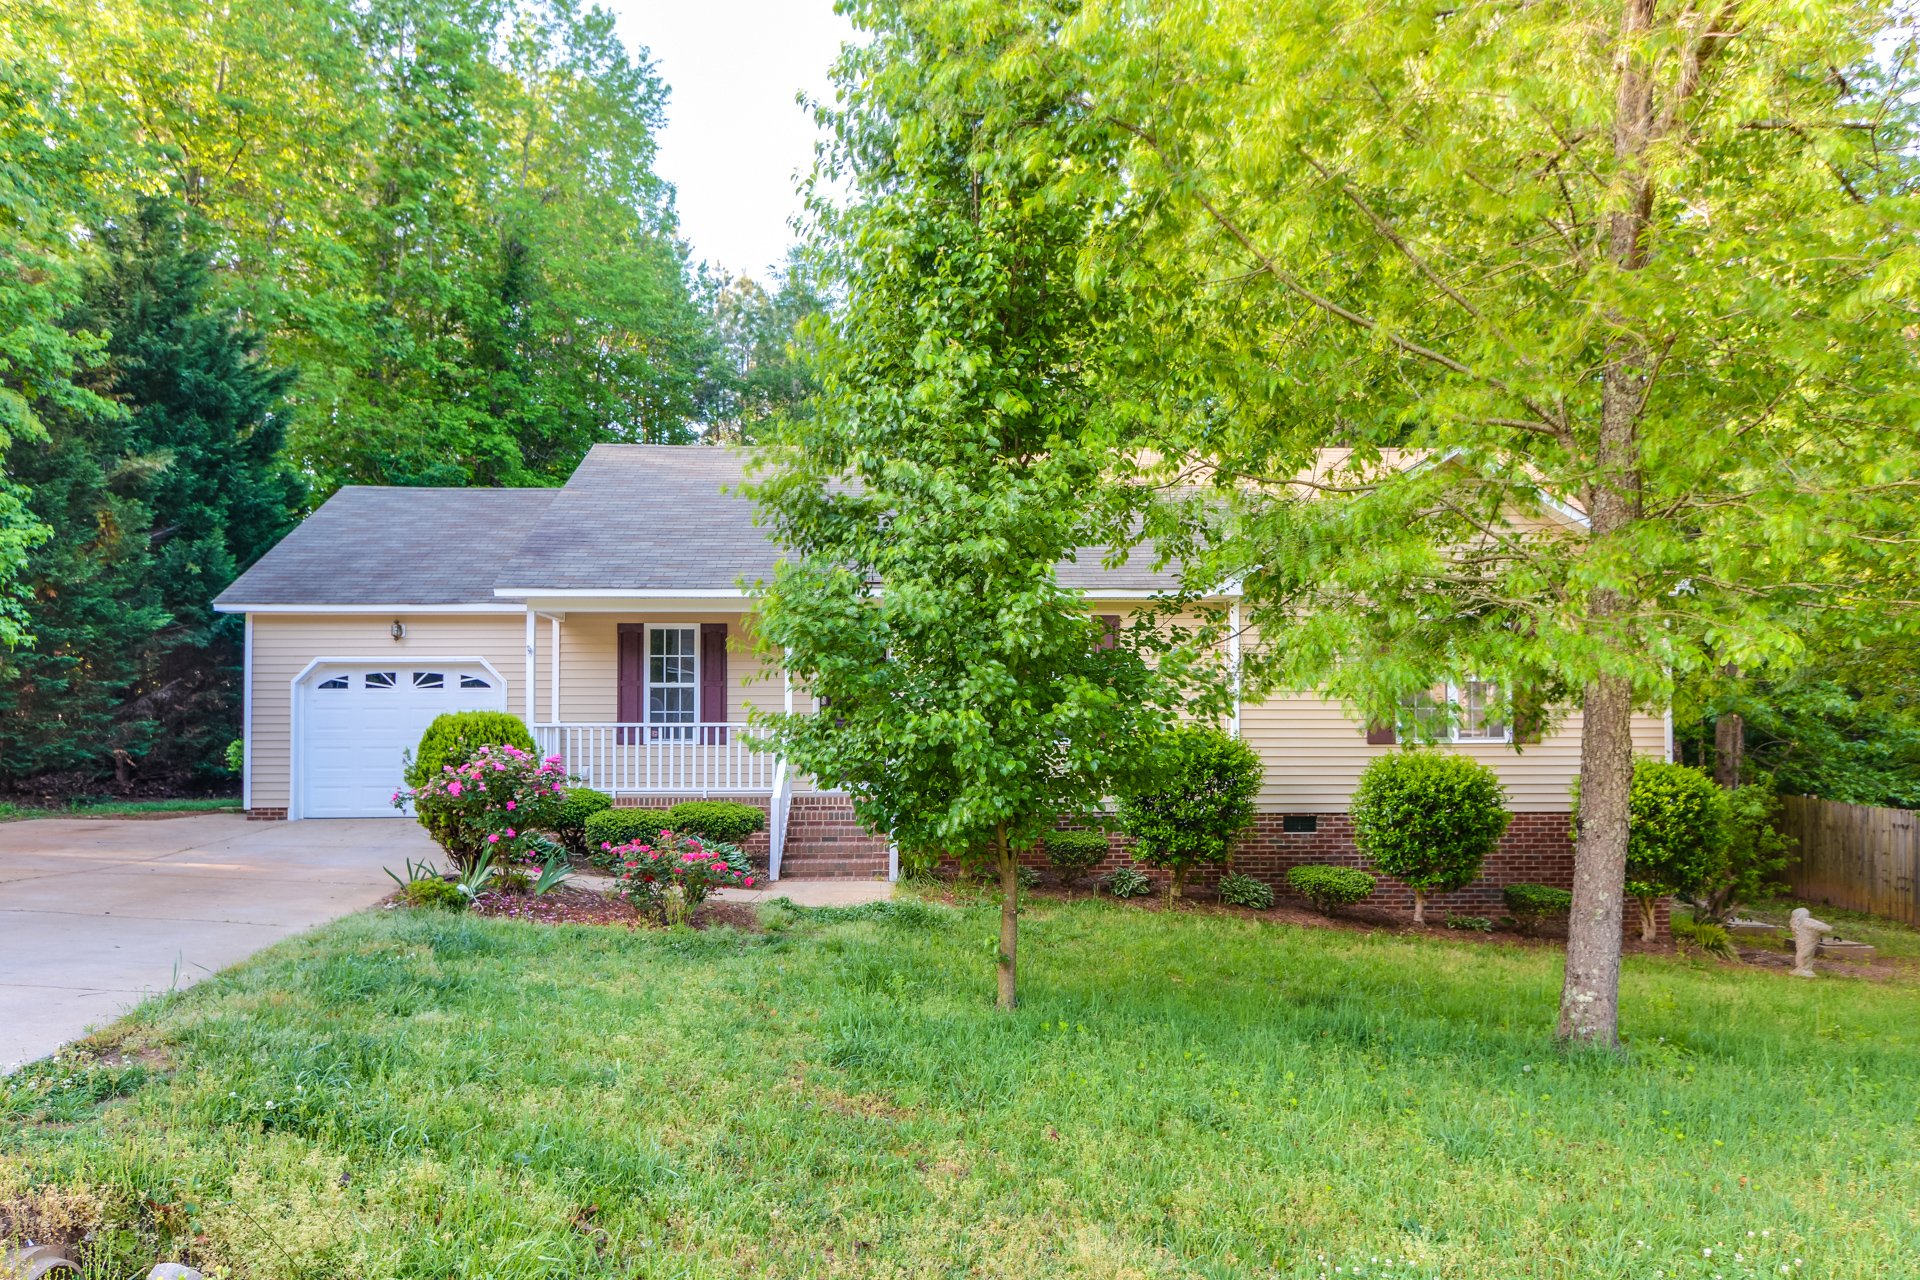 Photo 1 of 24 - 1909 Middle Ridge Dr, Willow Spring, NC 27592